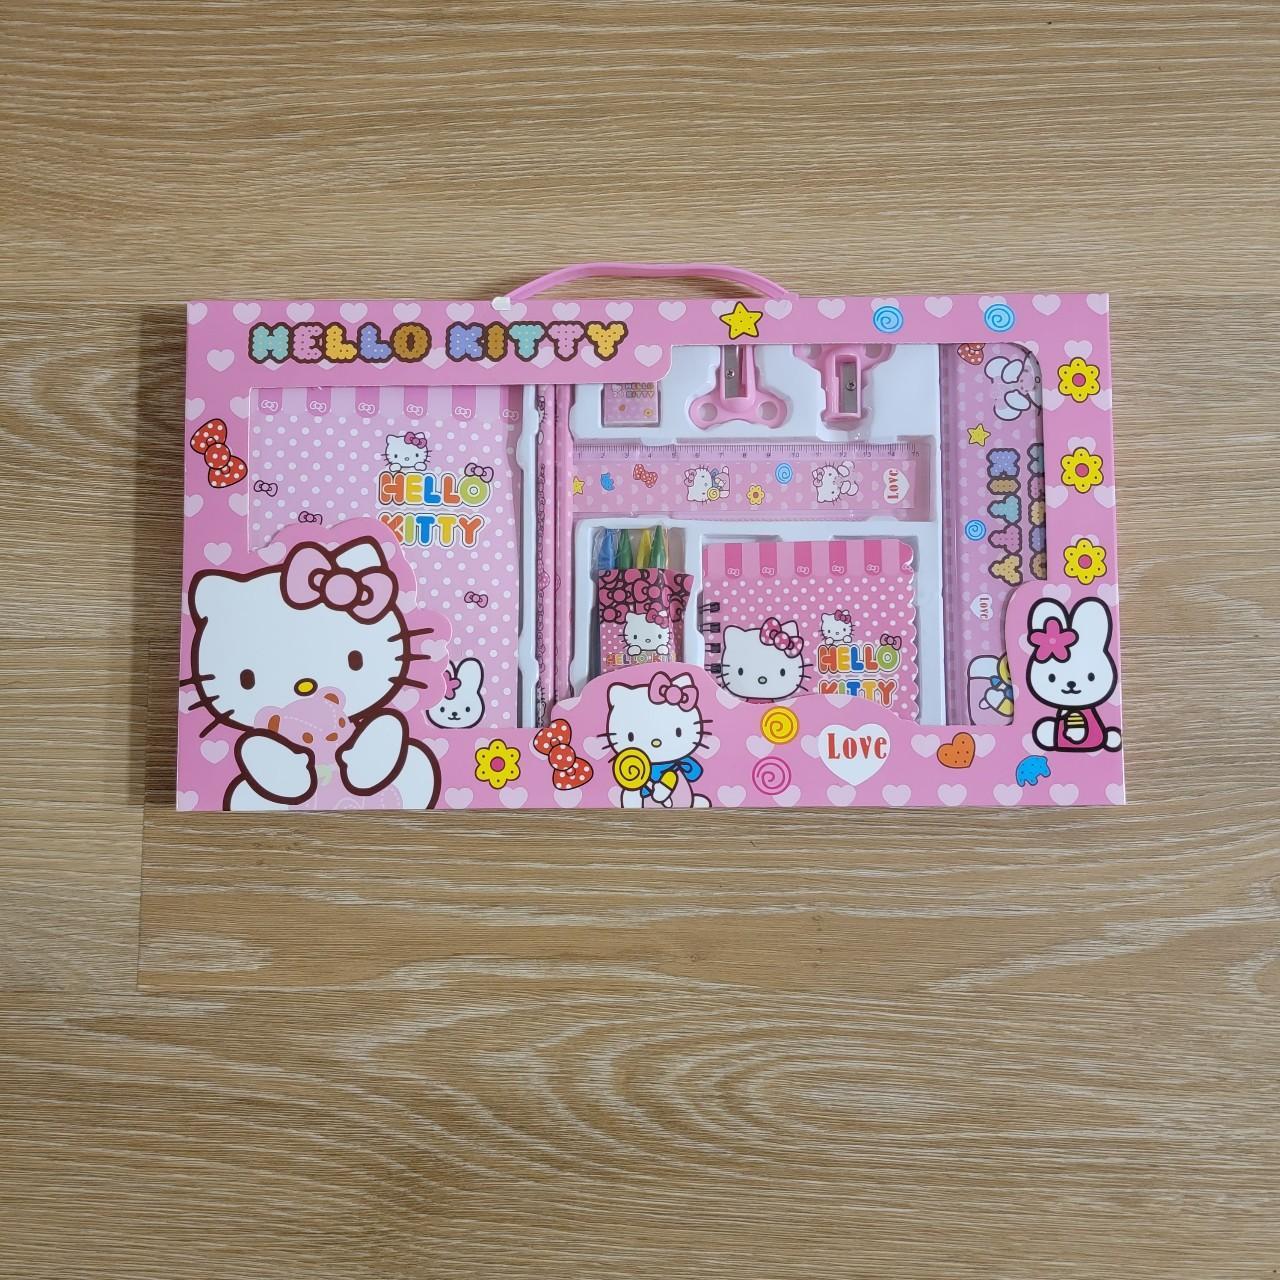 HELLO KITTY PEN SET • Brand new and great quality - Depop